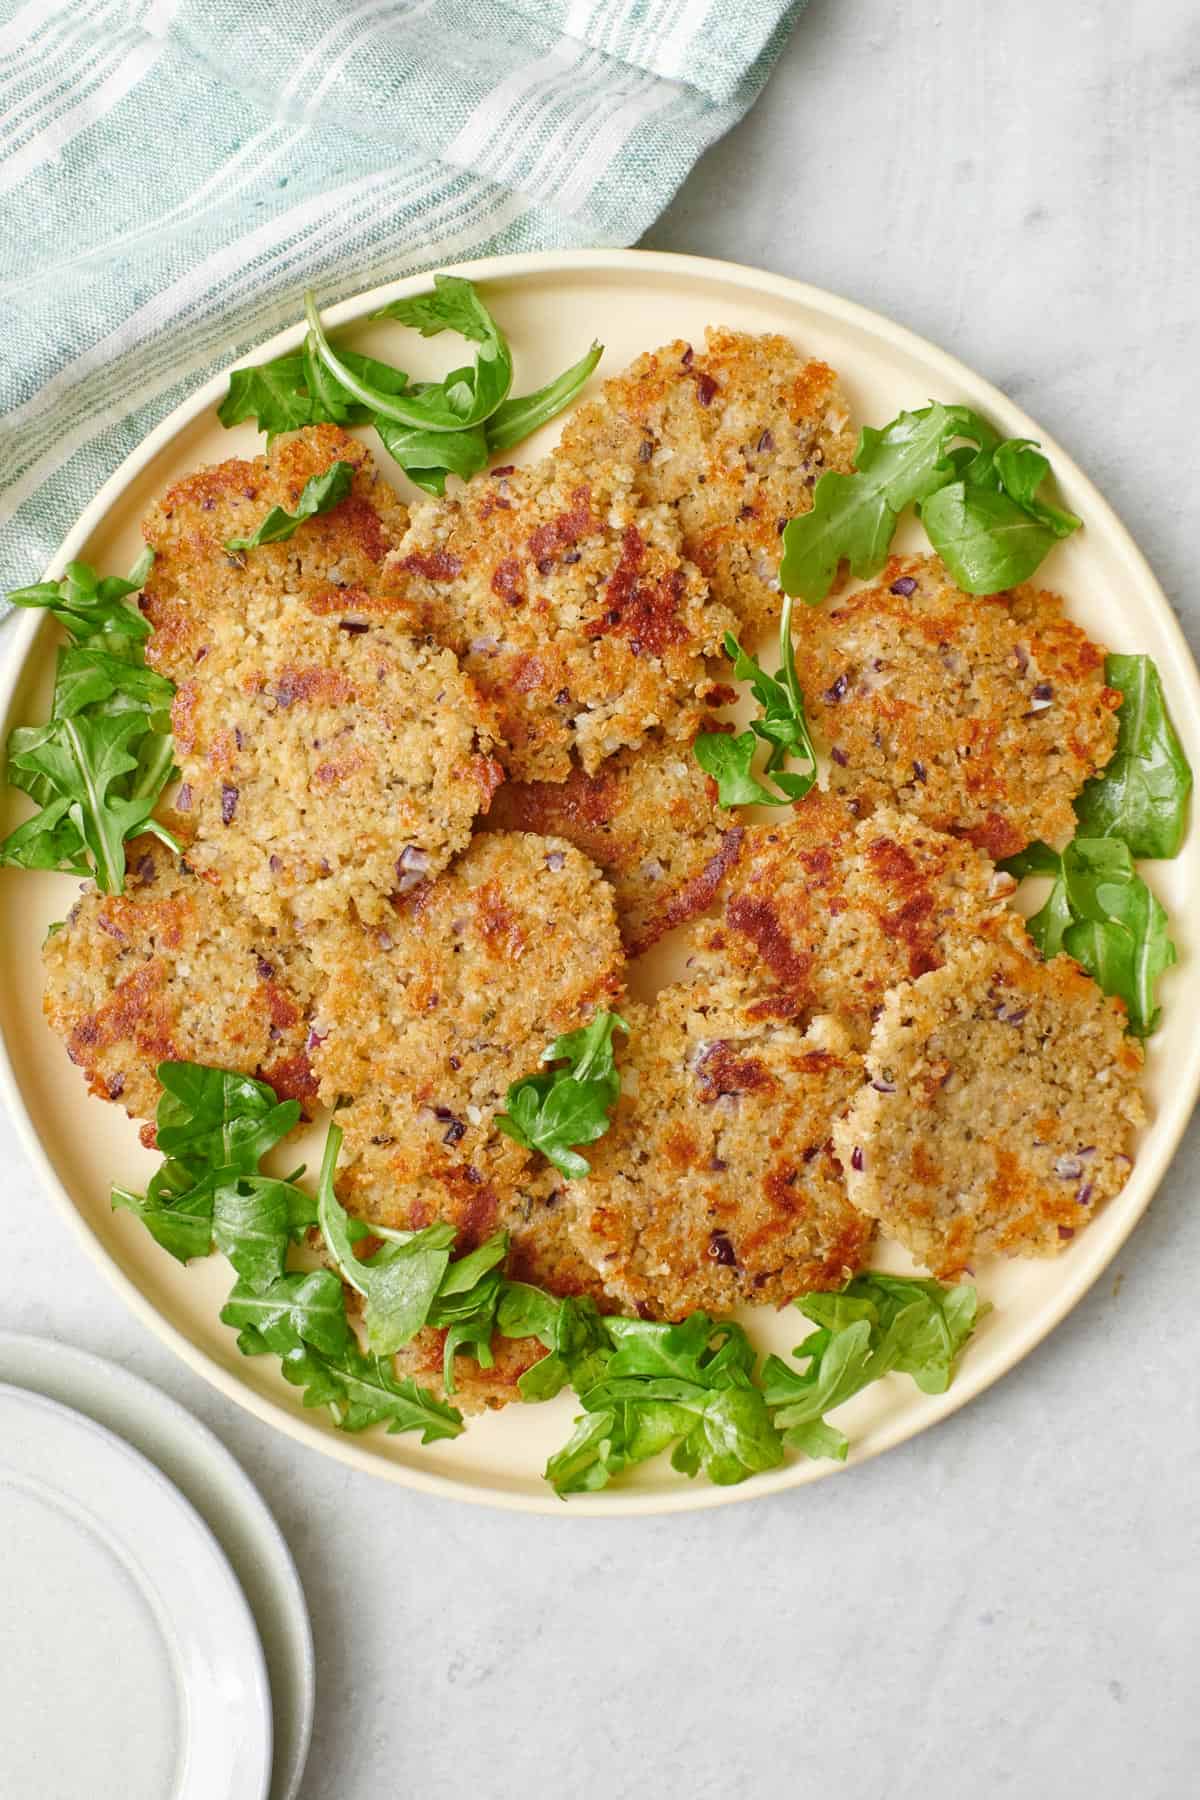 Crispy quinoa patties on a round plate with fresh greens.